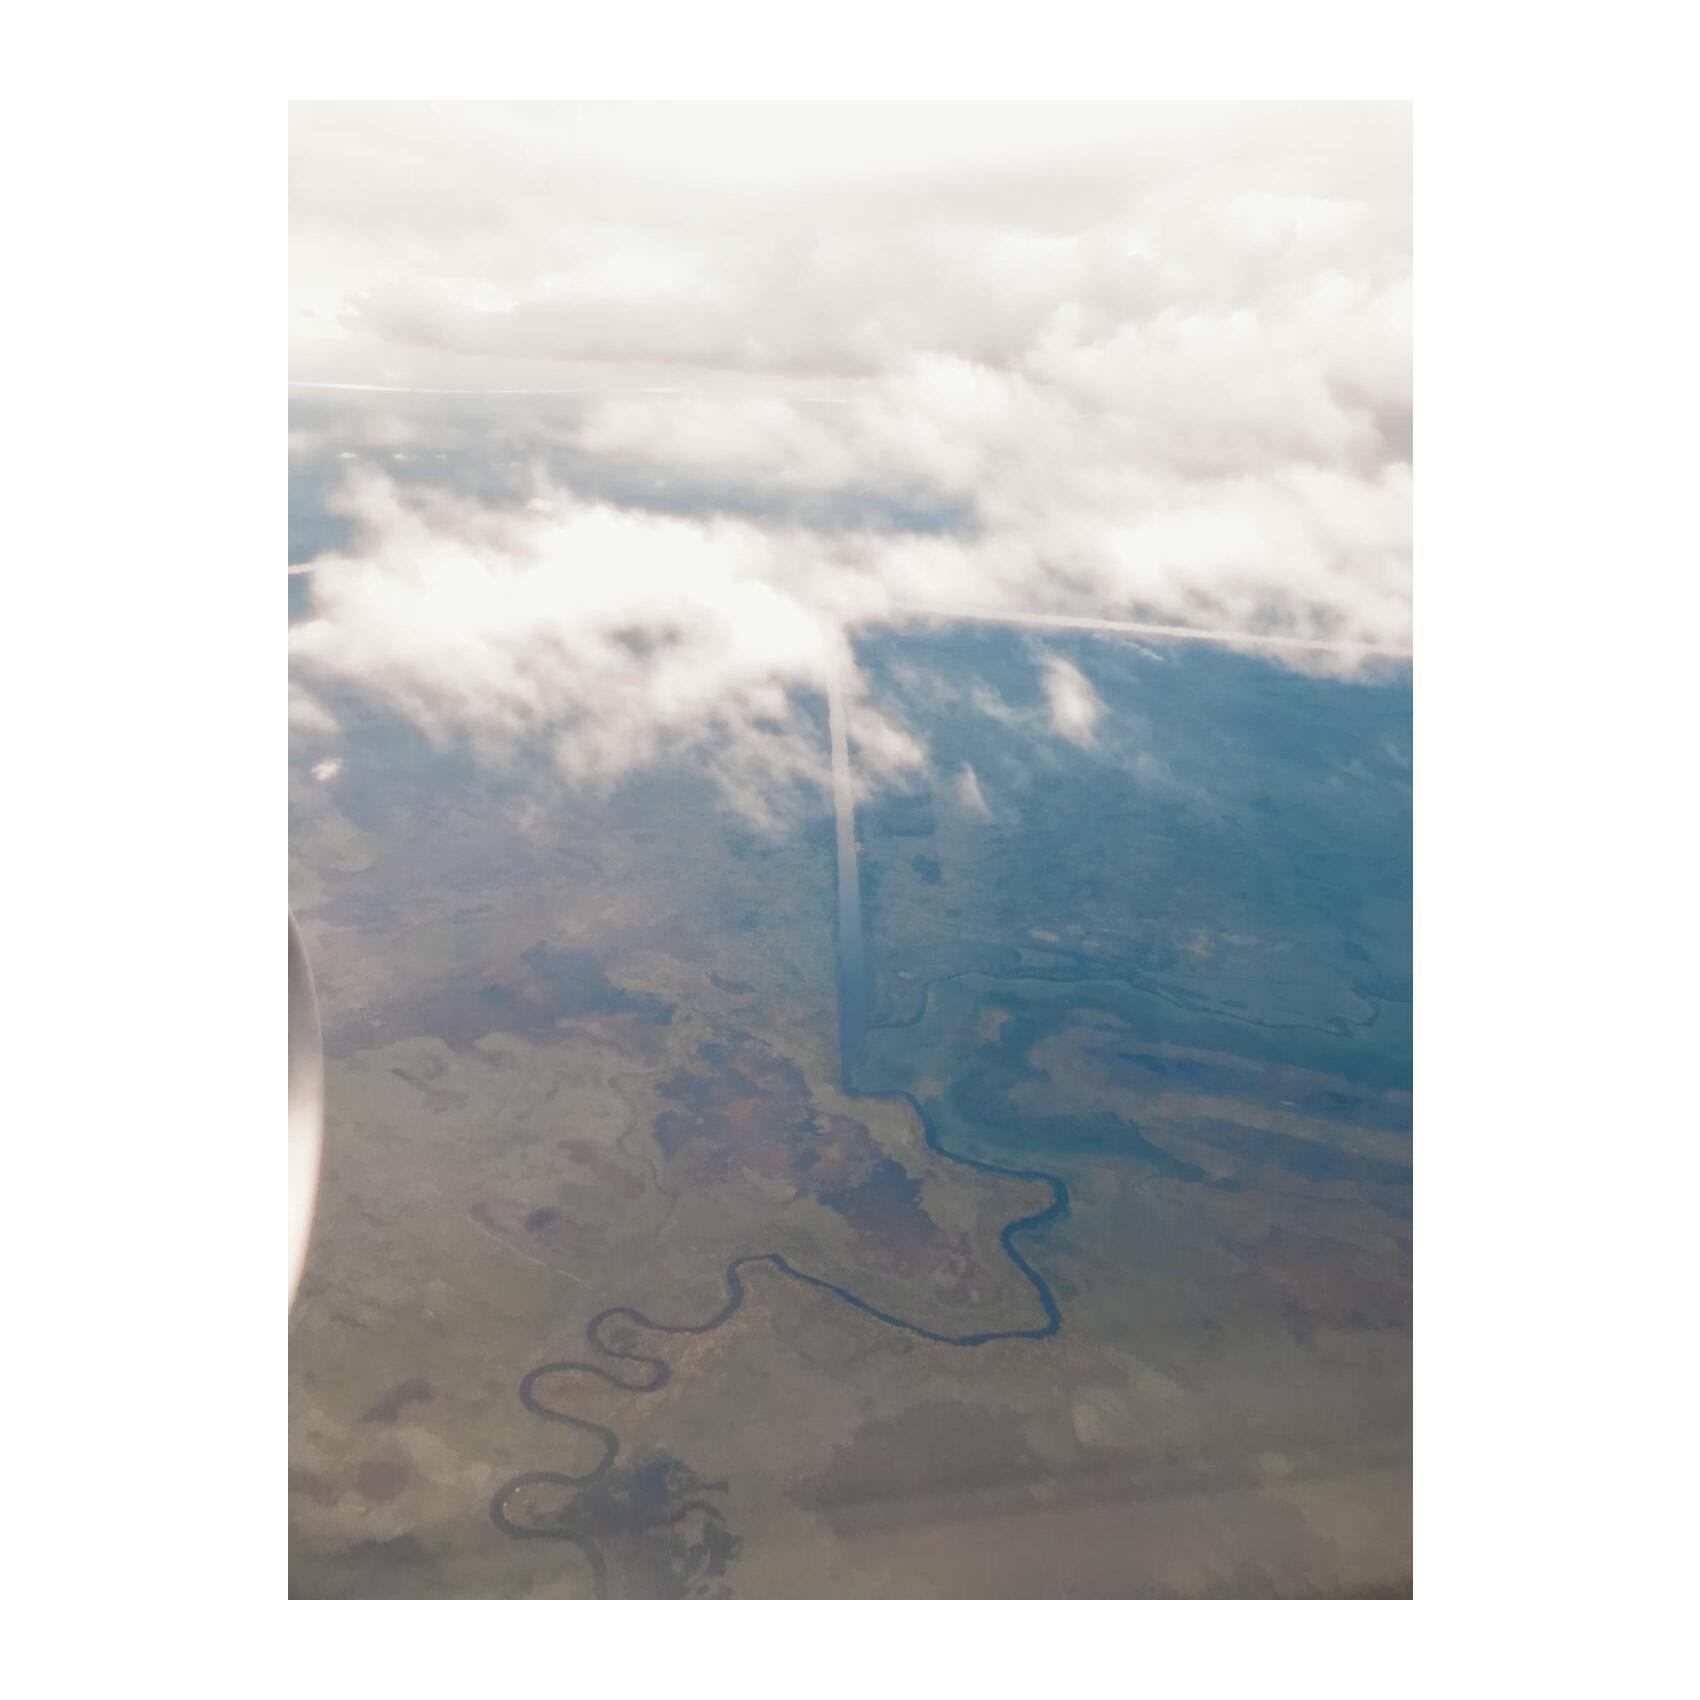 a plane window view of a small river running into a long straight irrigation channel